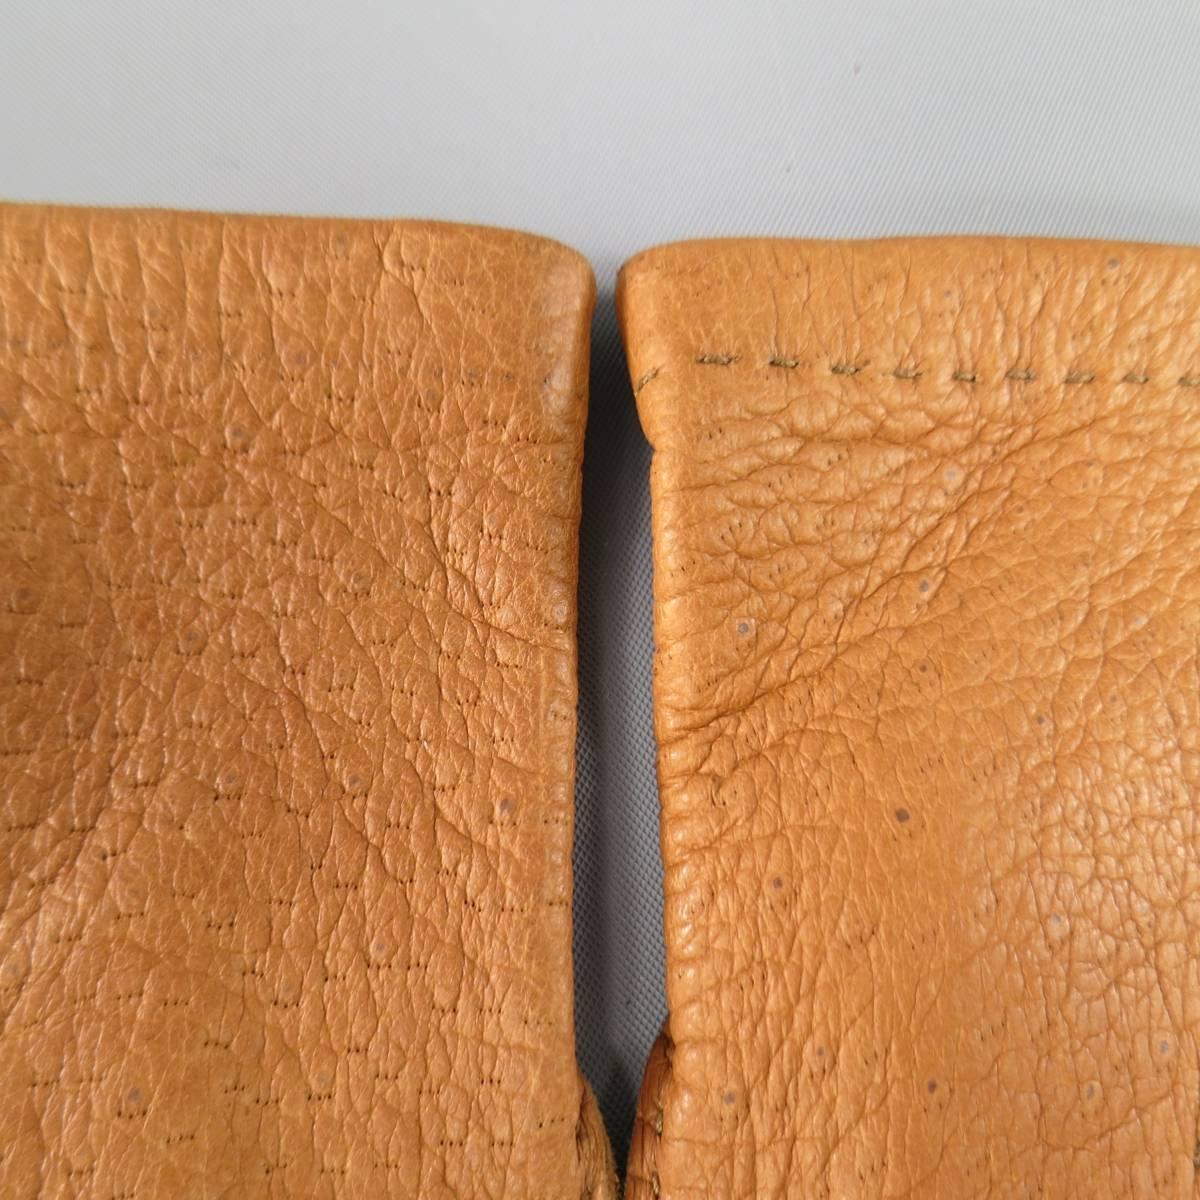 Vintage HERMES gloves in a rich rust tan textured peccary leather with top stitching throughout. Made in France.
 
Excellent  Pre-Owned Condition..
Marked: 7 1/2
 
Measurements:
Length: 9.5 in.
Width: 4 in.